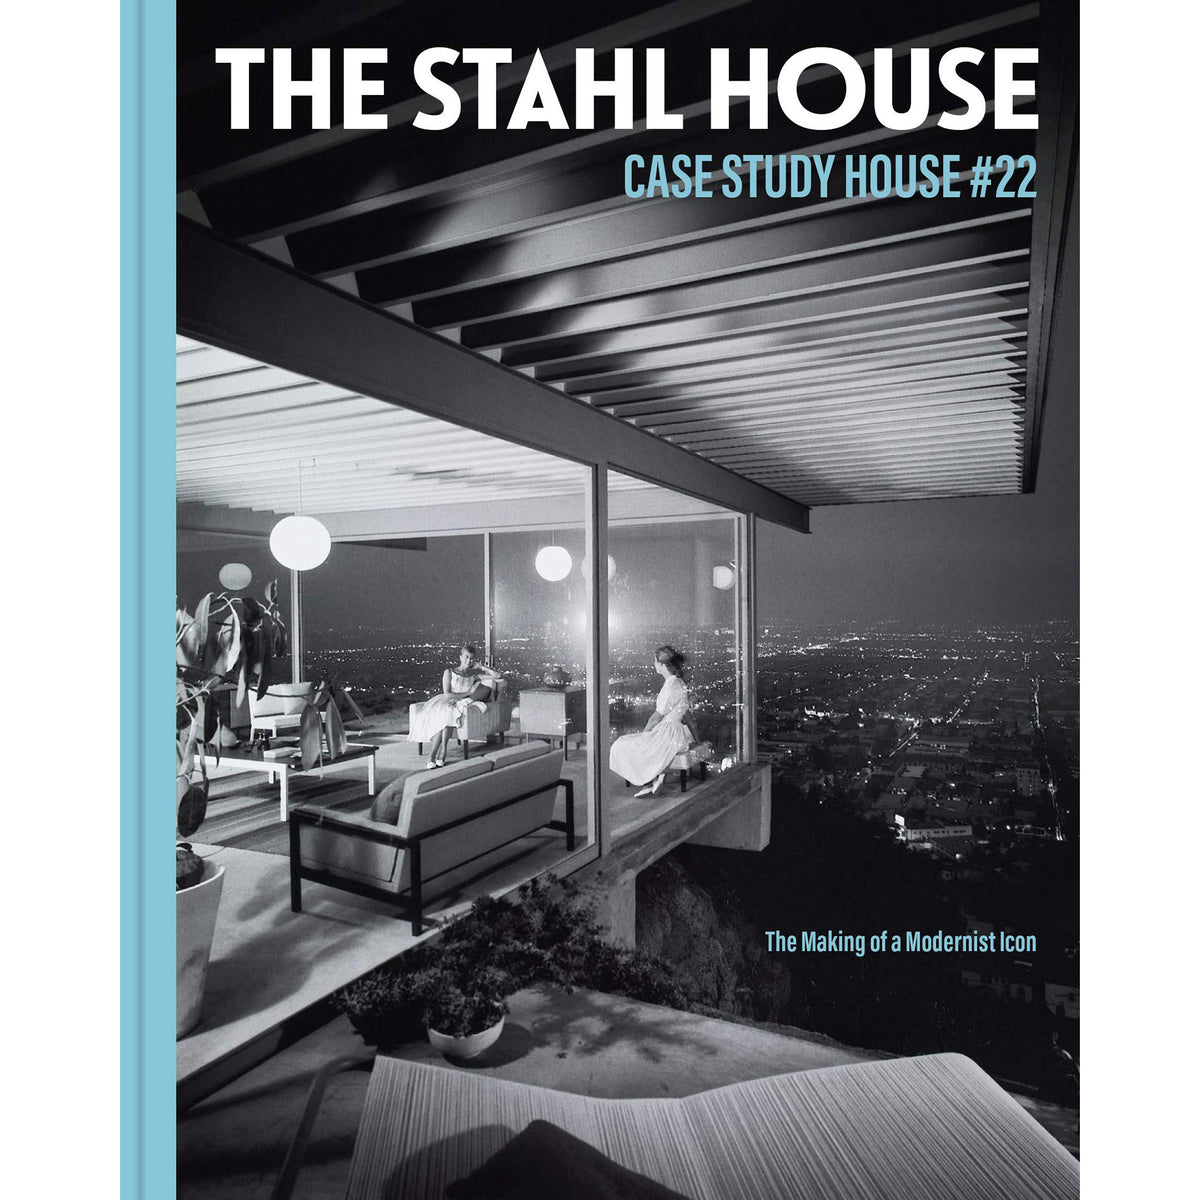 The Stahl House : Case Study House #22 The Making of a Modernist Icon